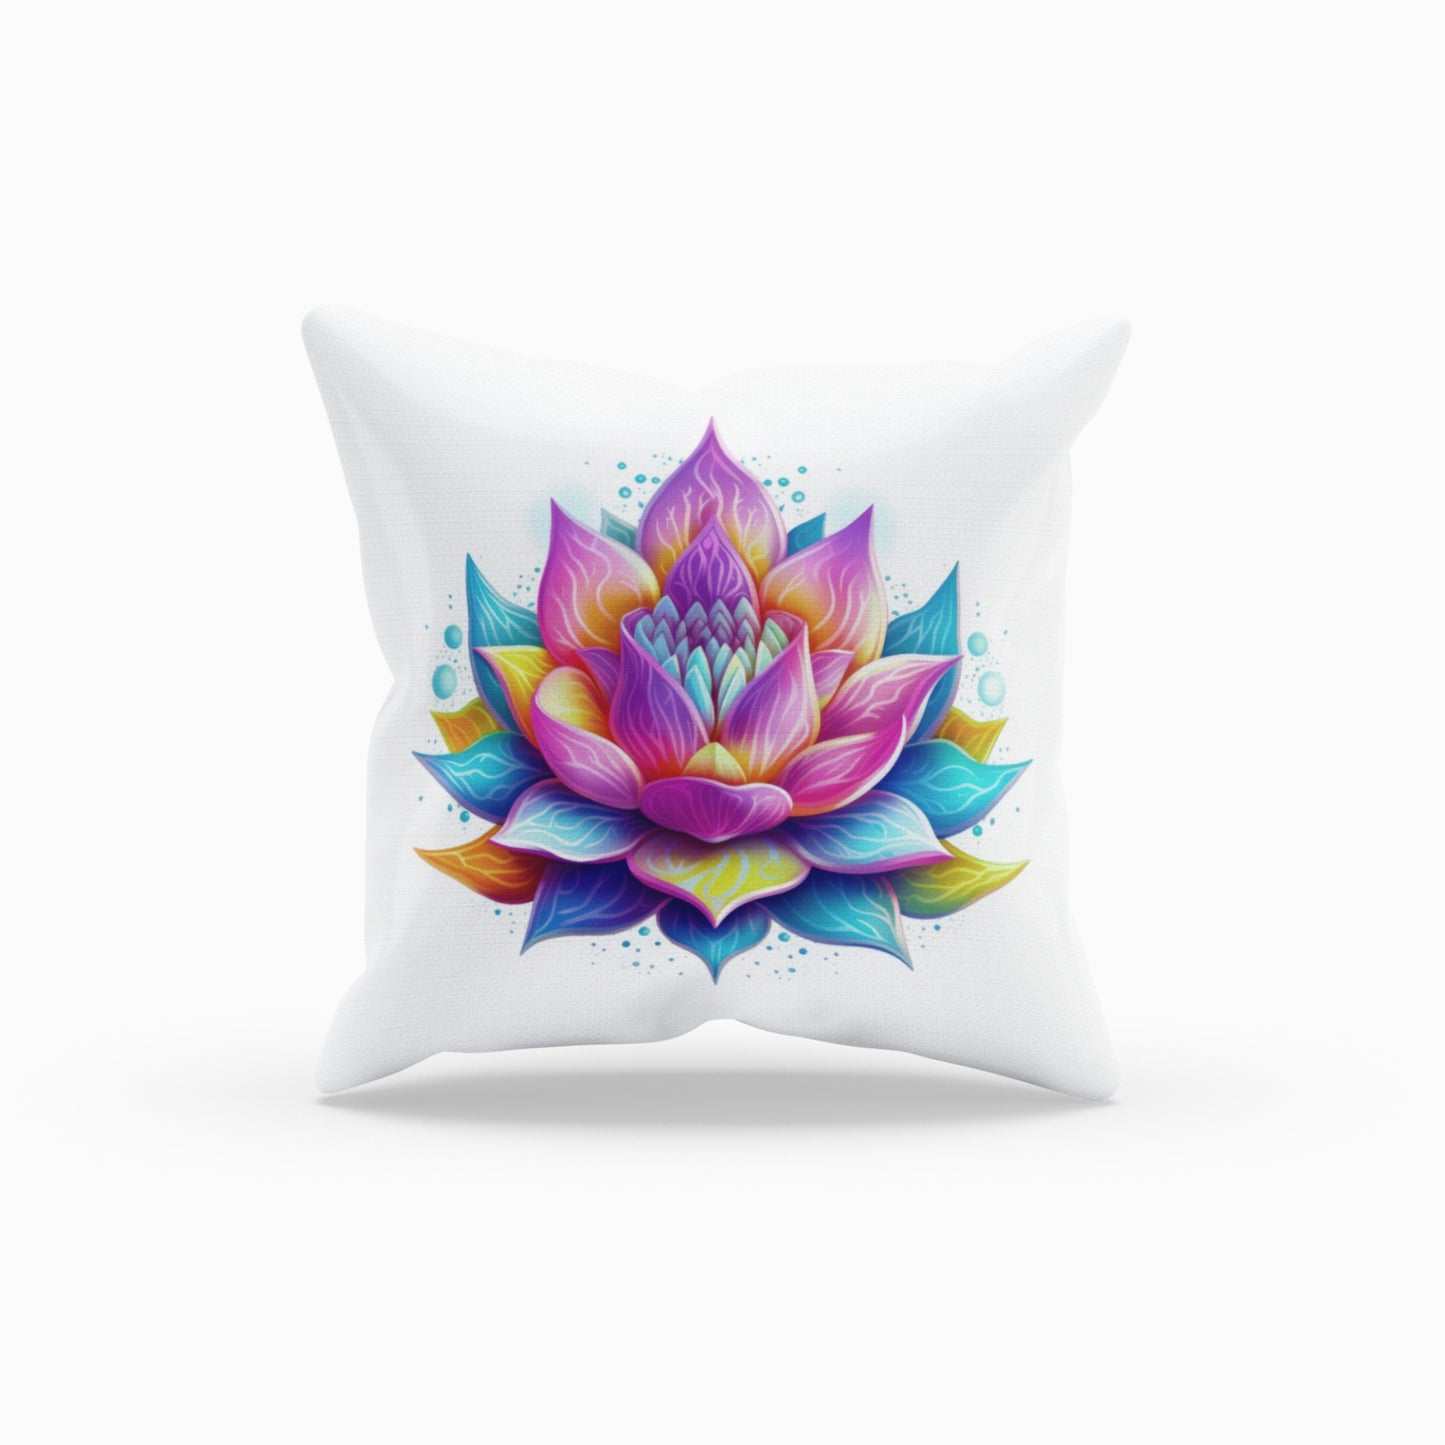 Artistic Lotus Patterned Throw Pillow